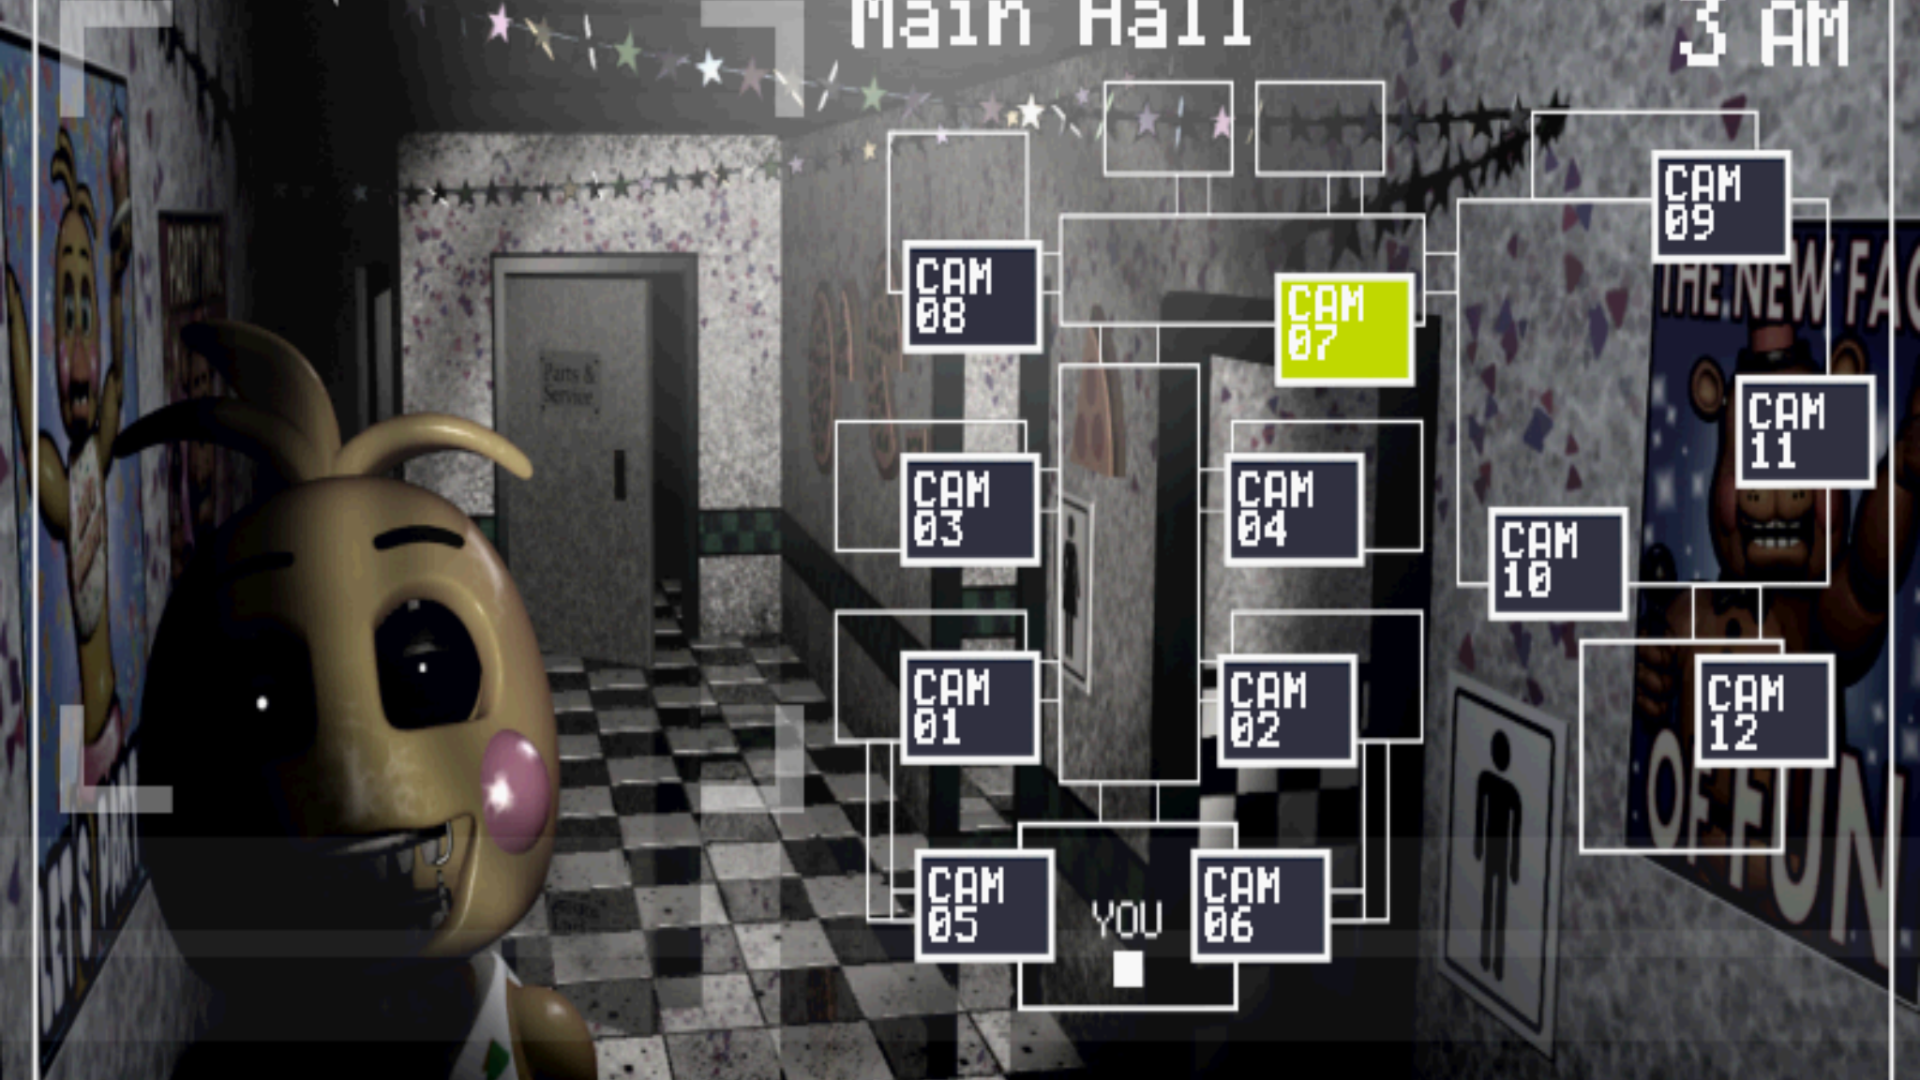 The game interface Five Nights at Freddy's